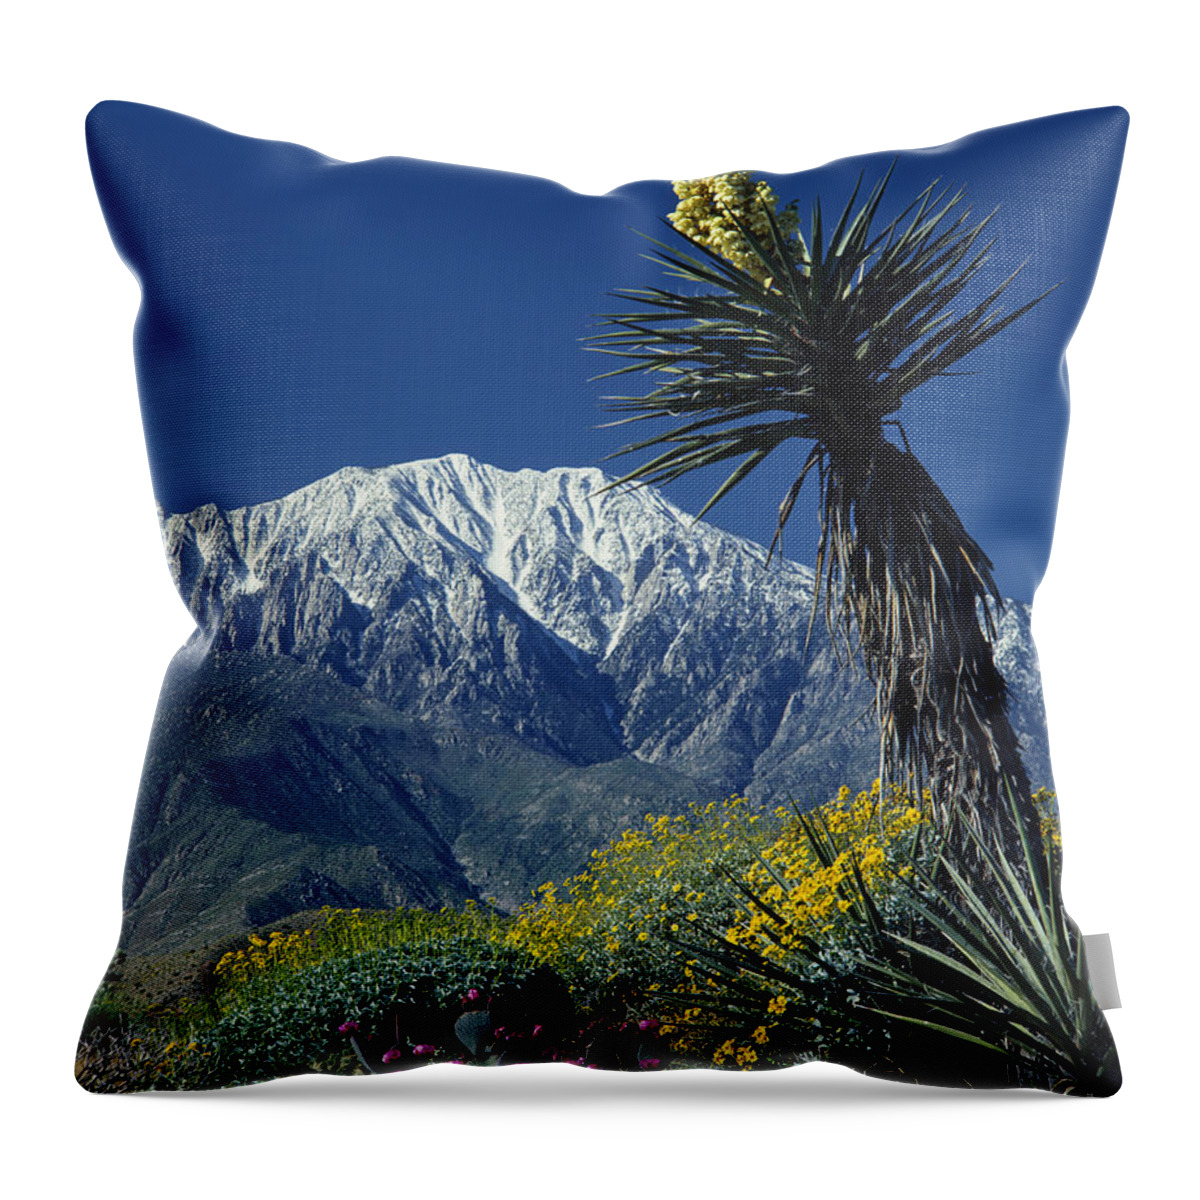 Desert Throw Pillow featuring the photograph Desert Blooms by Ed Cooper Photography